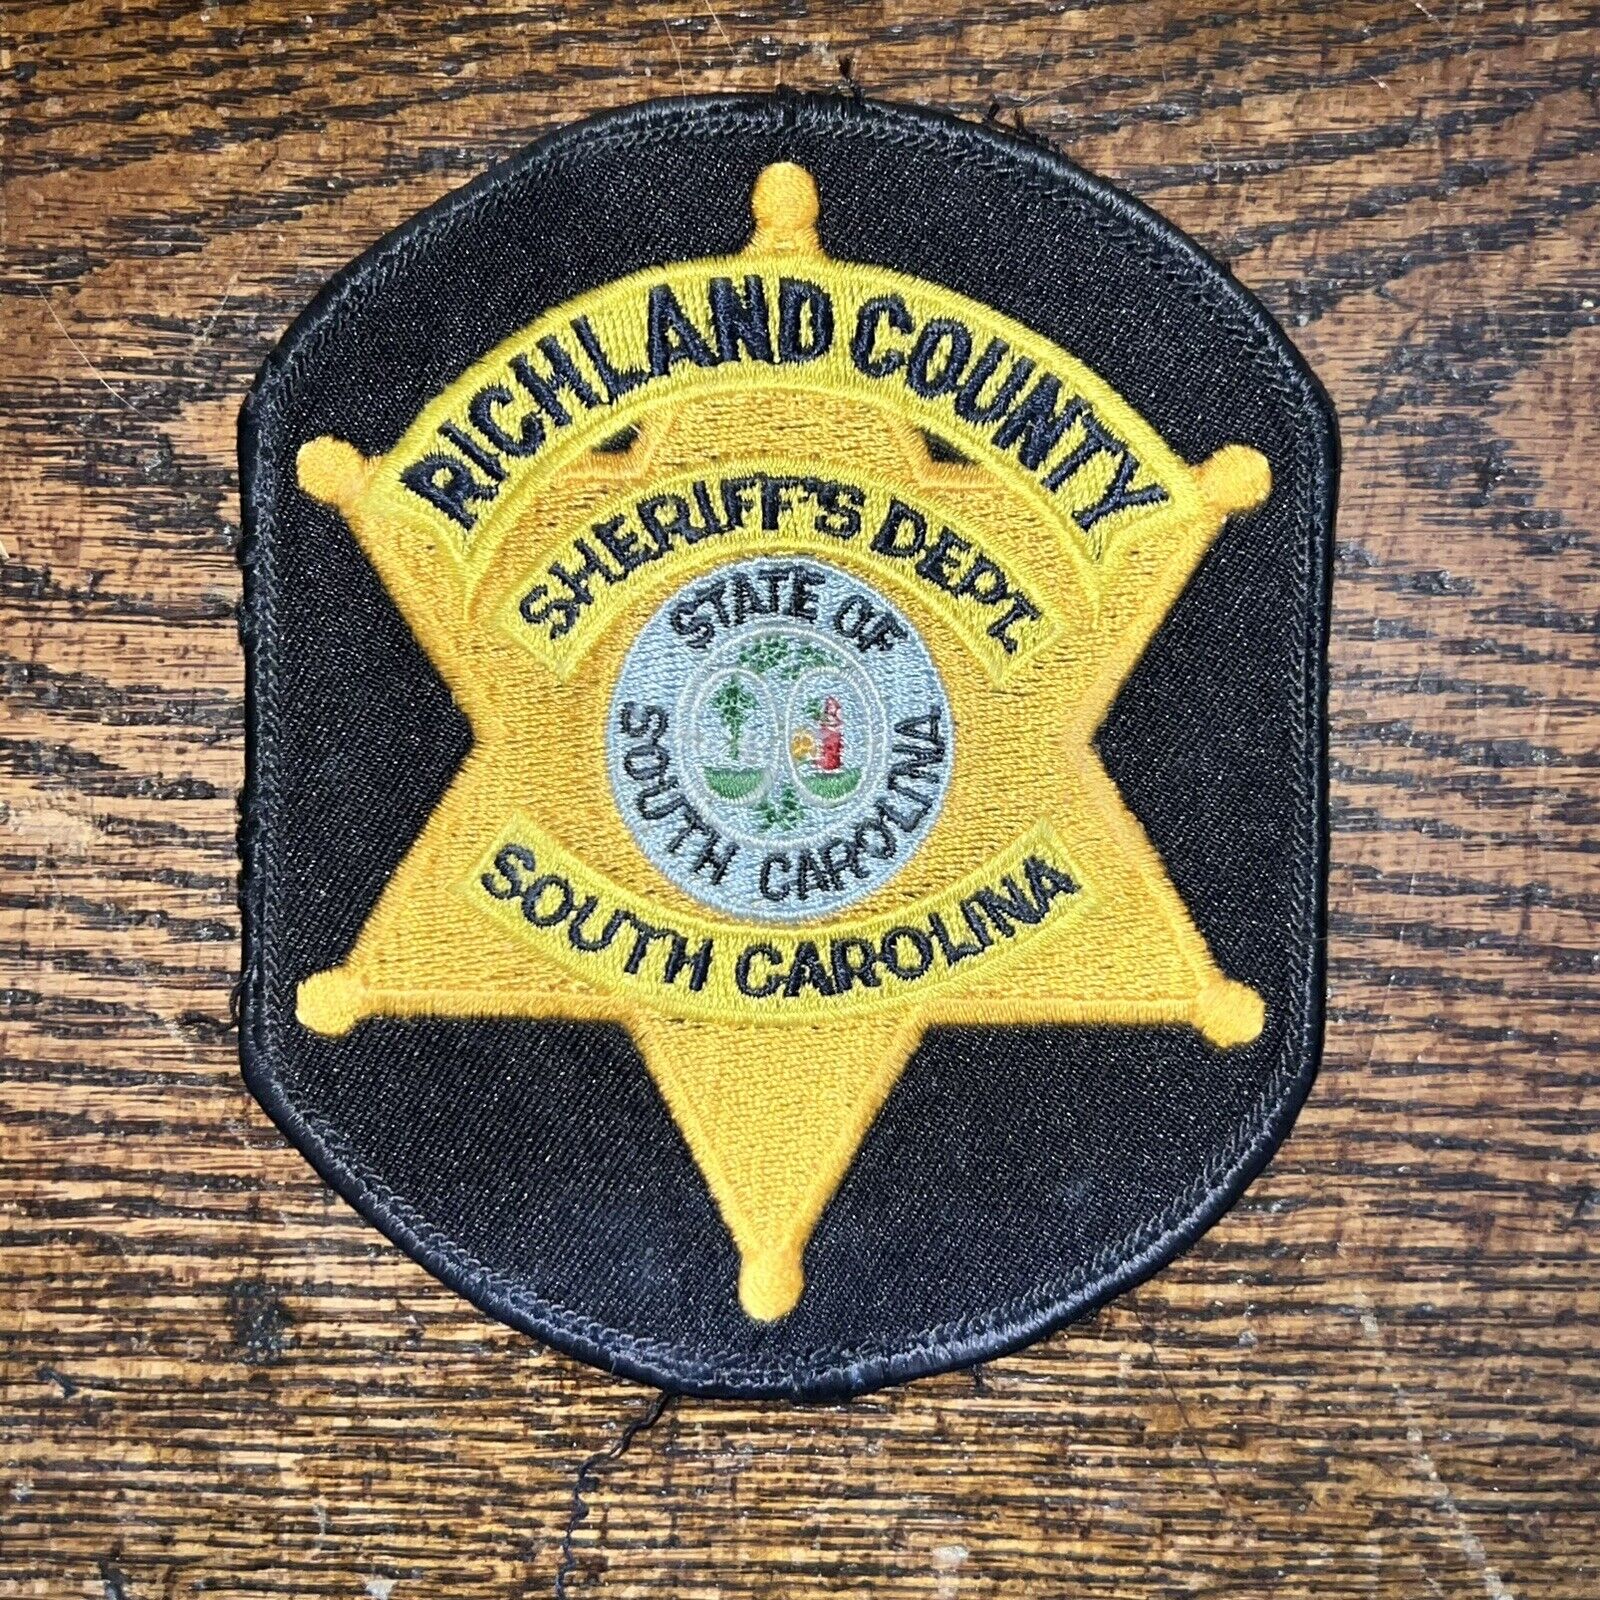 Richland County South Carolina Sheriff’s Department Police Patch